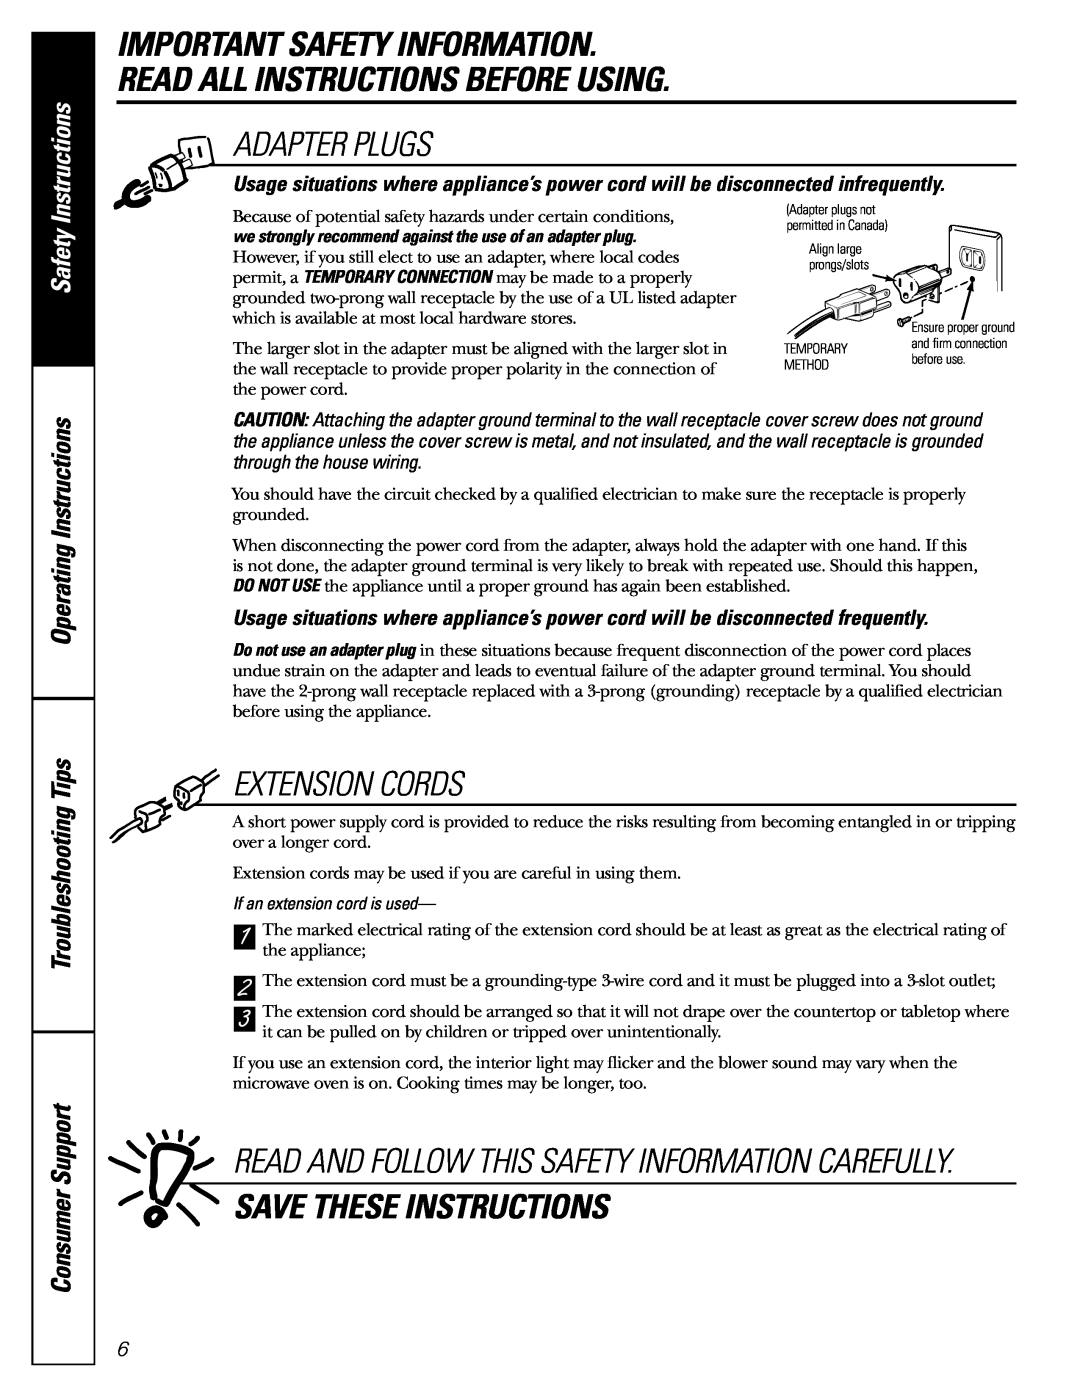 GE JE1160 owner manual Important Safety Information Read All Instructions Before Using, Adapter Plugs, Extension Cords 